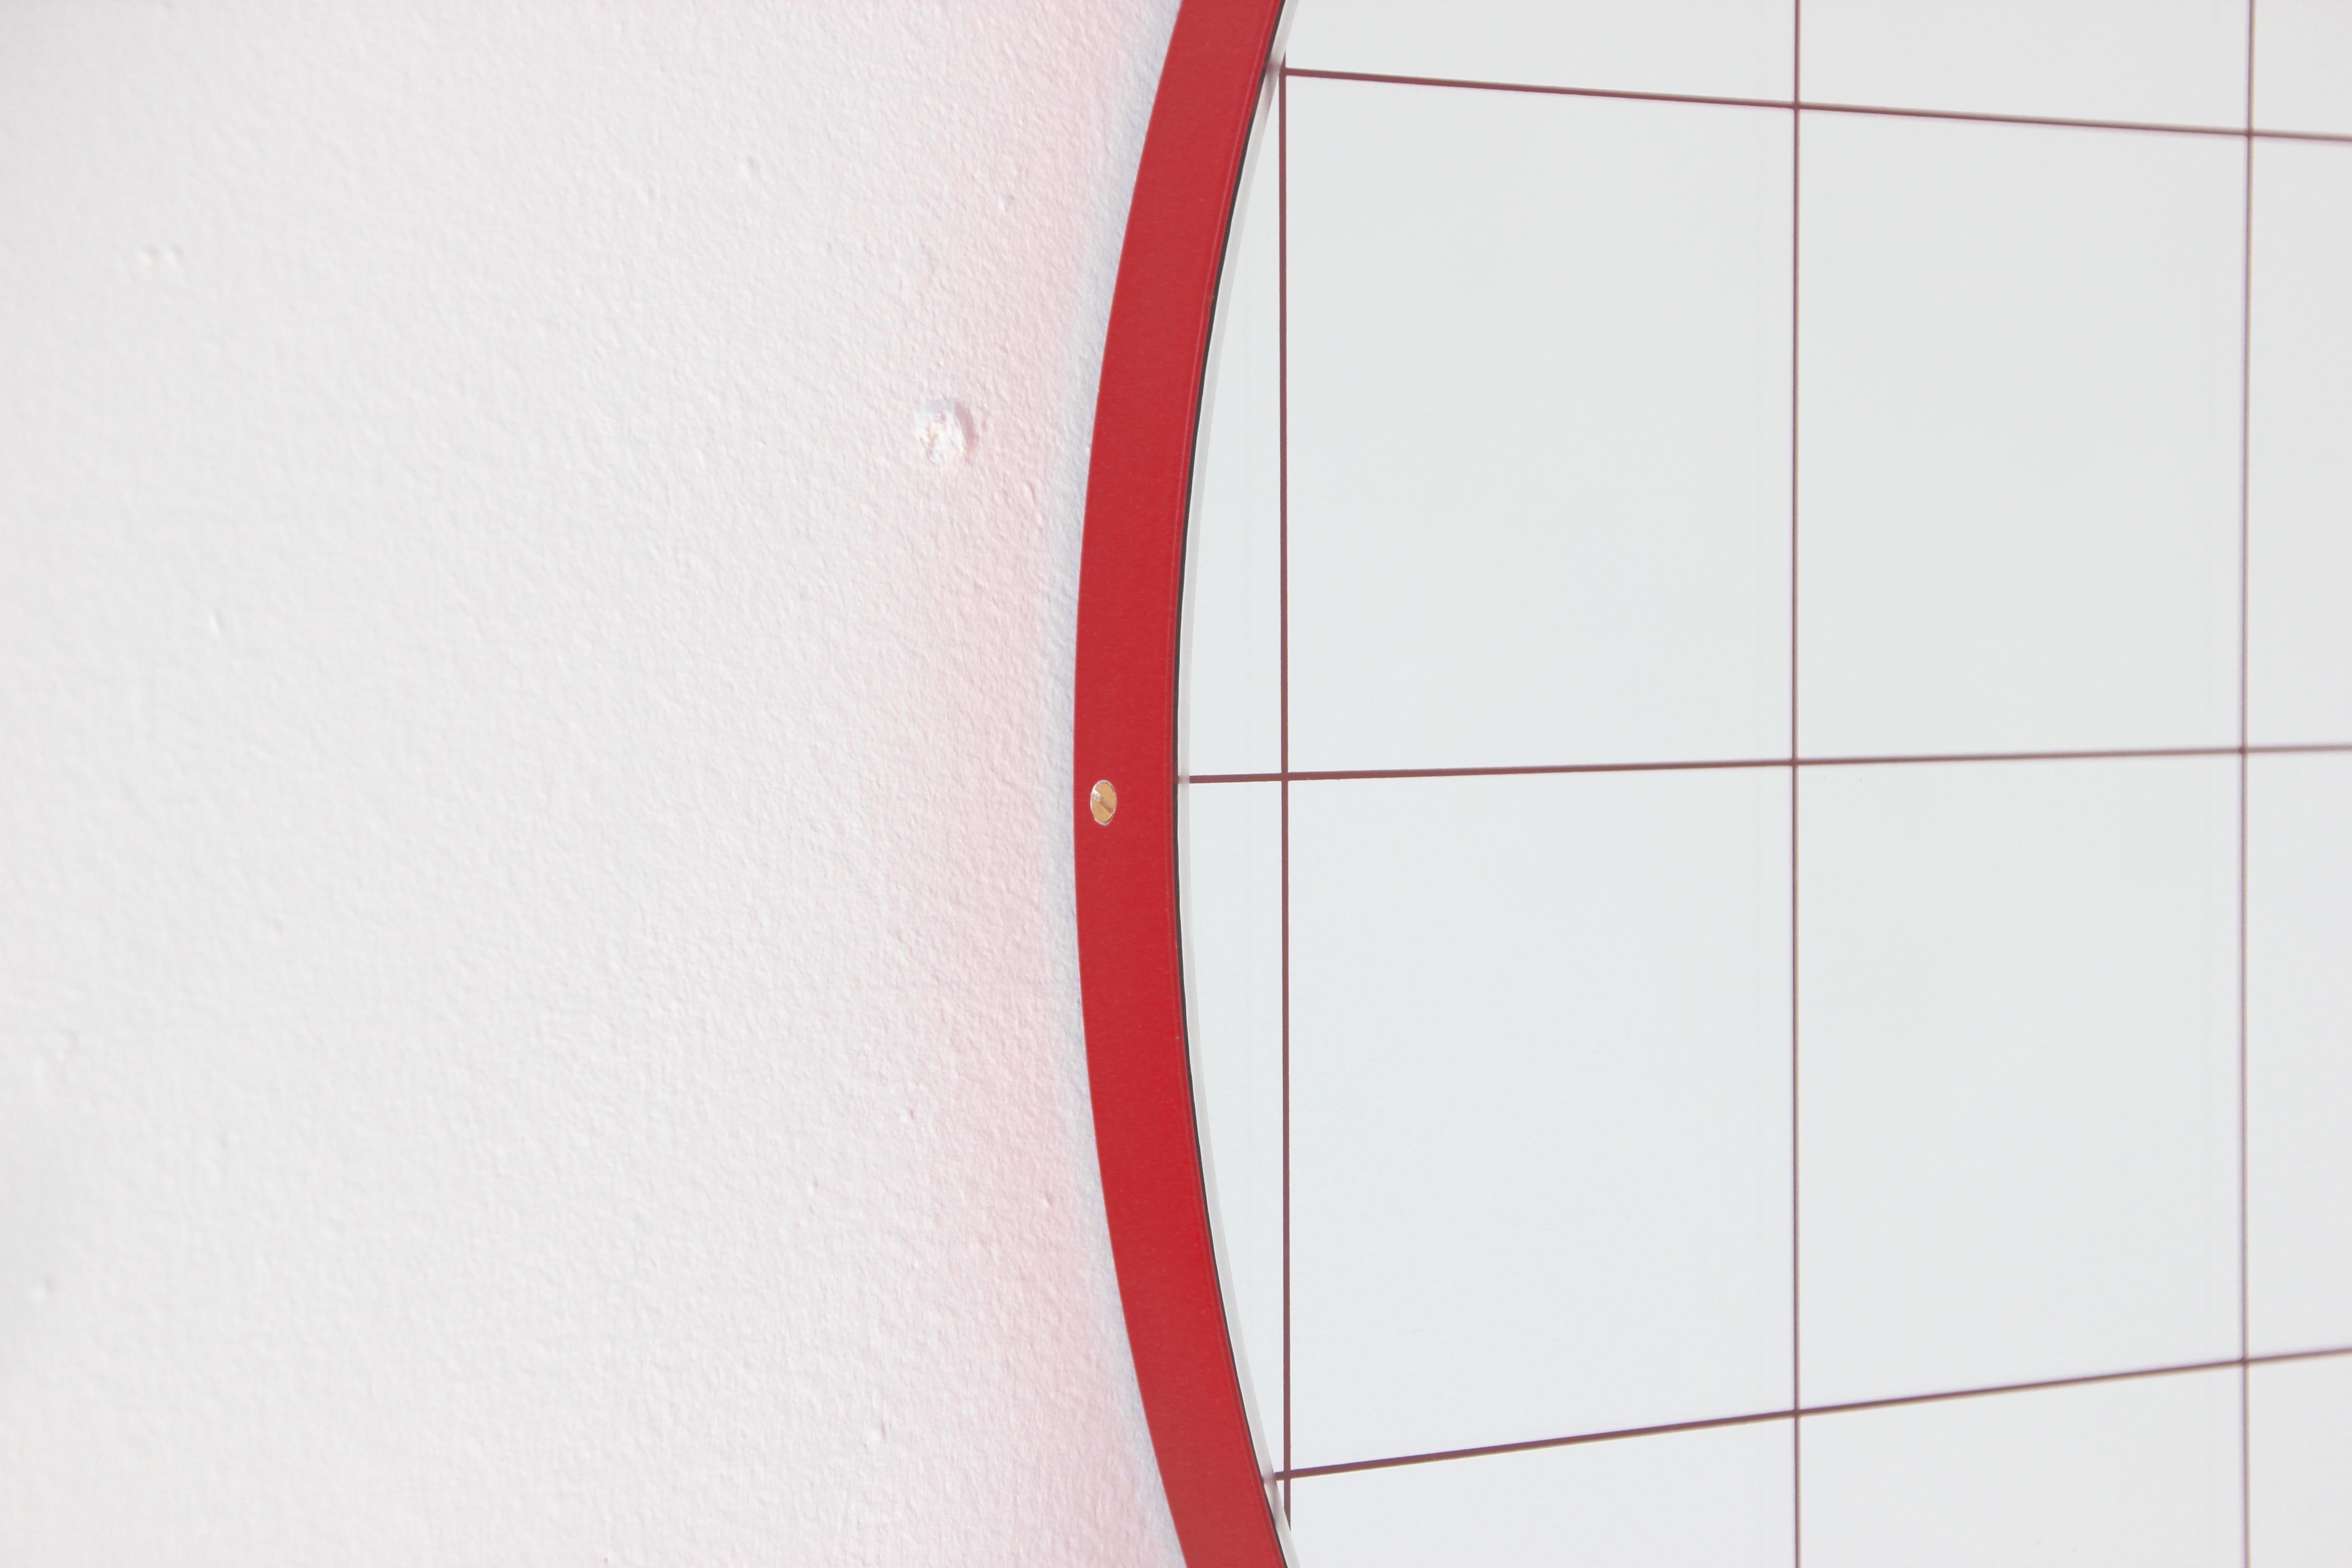 Orbis Red Grid Round Contemporary Sandblasted Mirror with Red Frame, XL 1